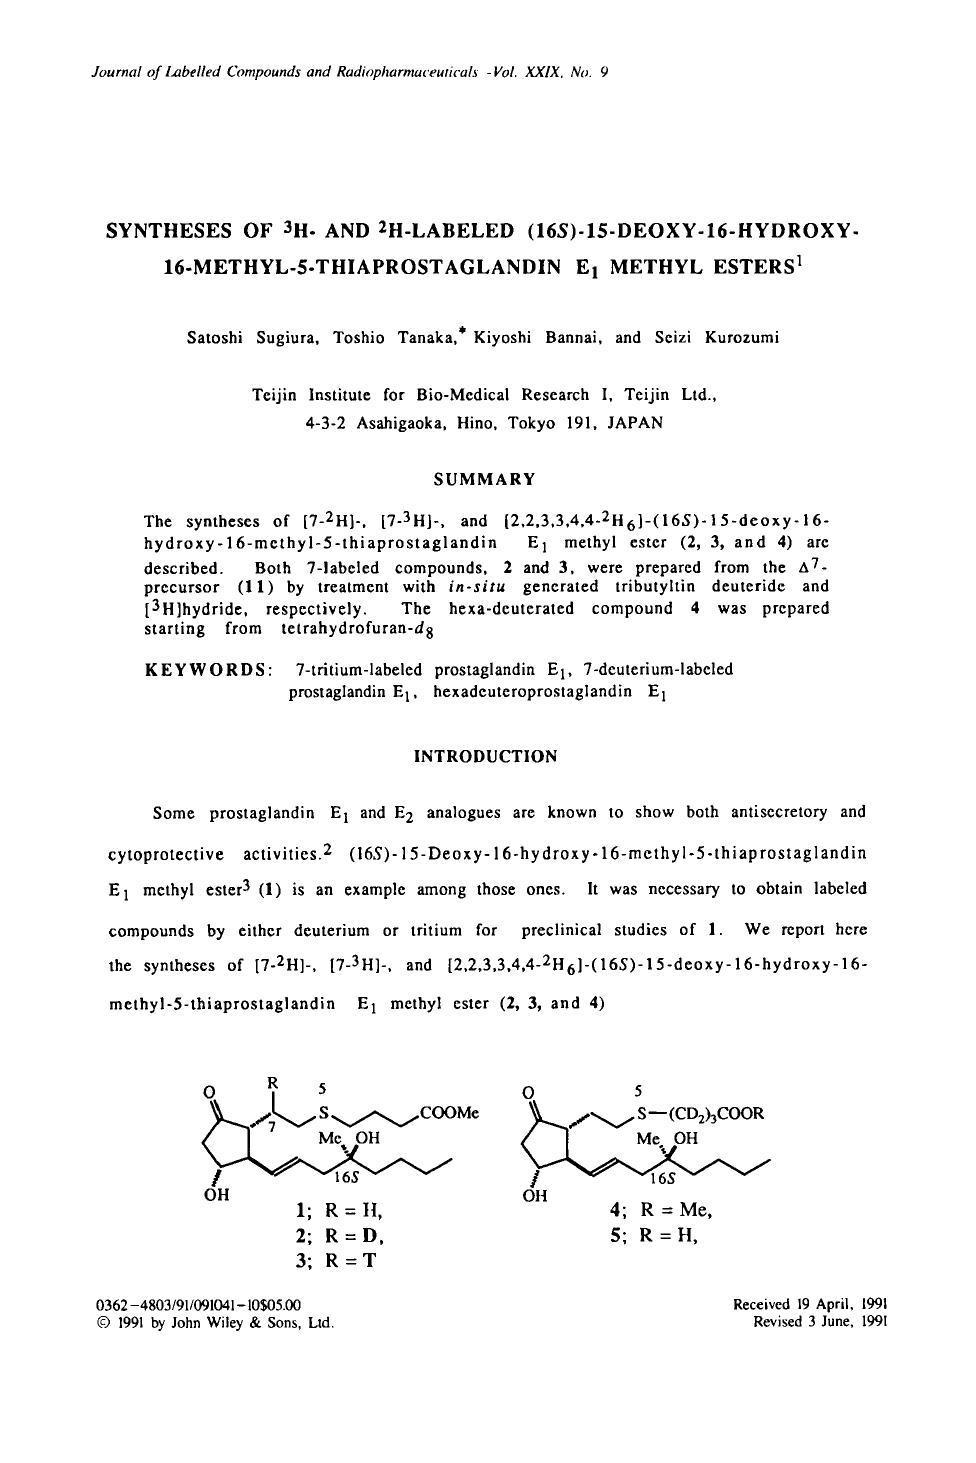 Syntheses of 3H- and 2H-labeled (16S)-15-deoxy-16-hydroxy-16-methyl-5-thiaprostaglandin E1 methyl esters by Unknown